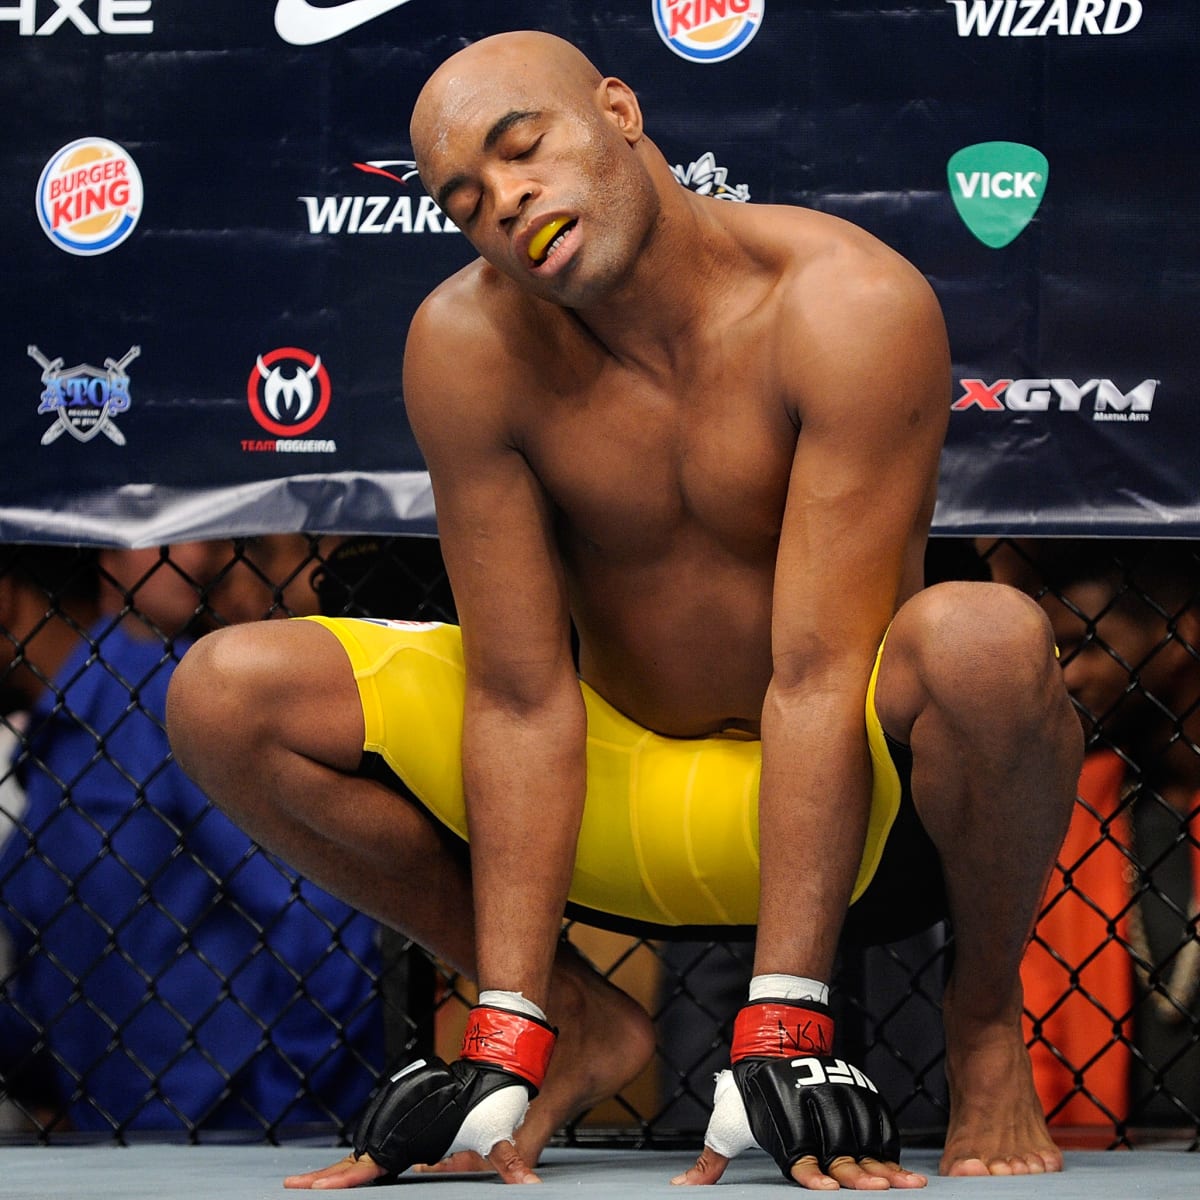 UFC legend Anderson Silva has history in London ahead of Michael